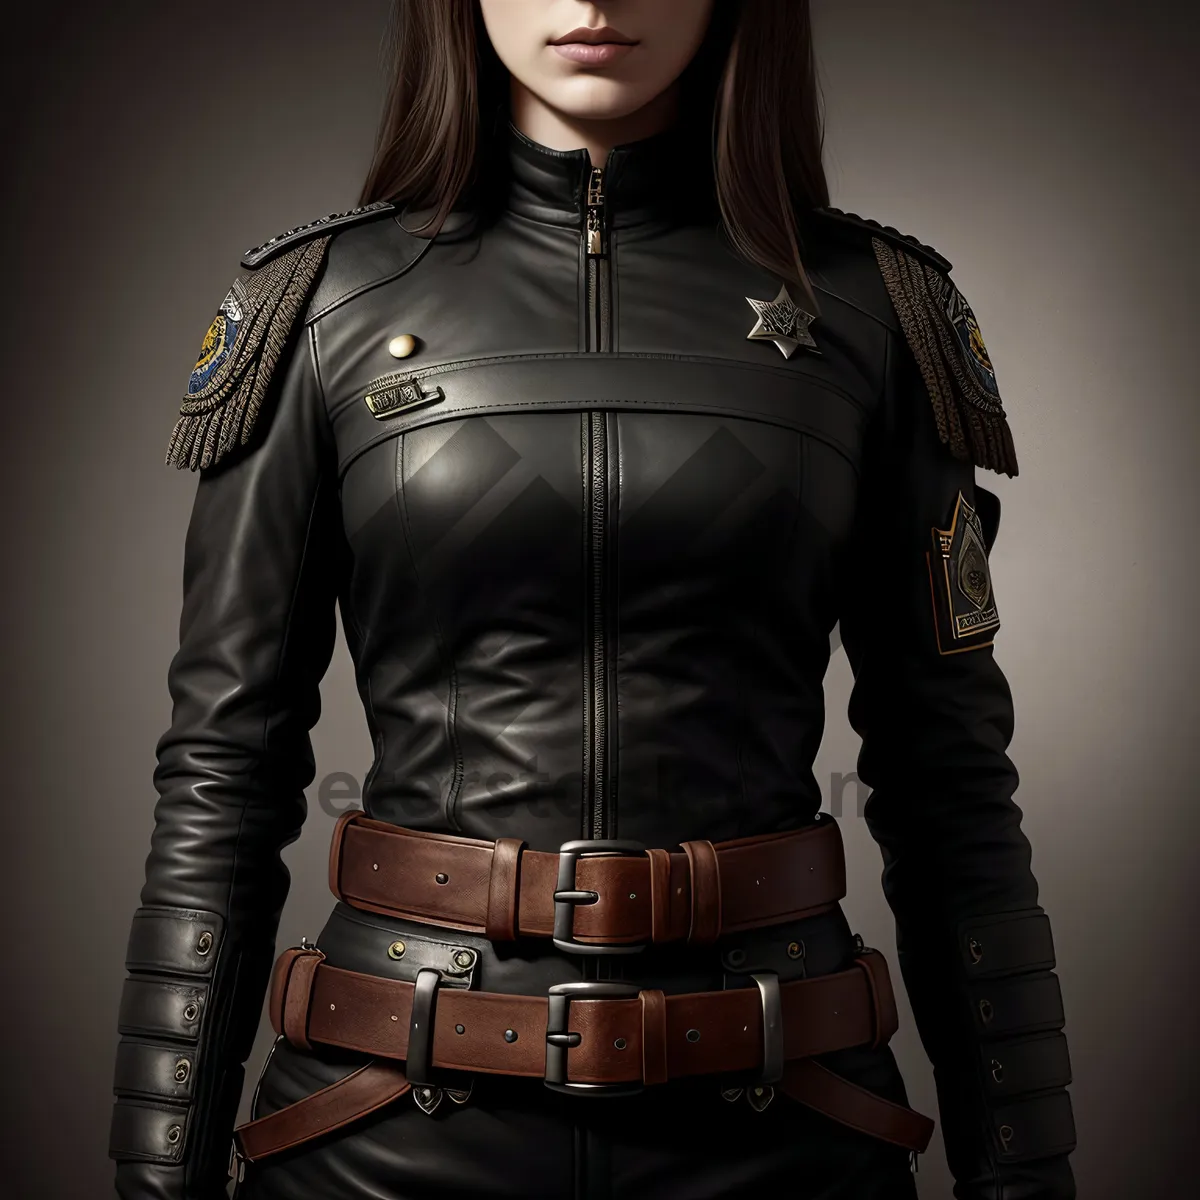 Picture of Black Leather Beauty - Sexy and Stylish Fashion Model